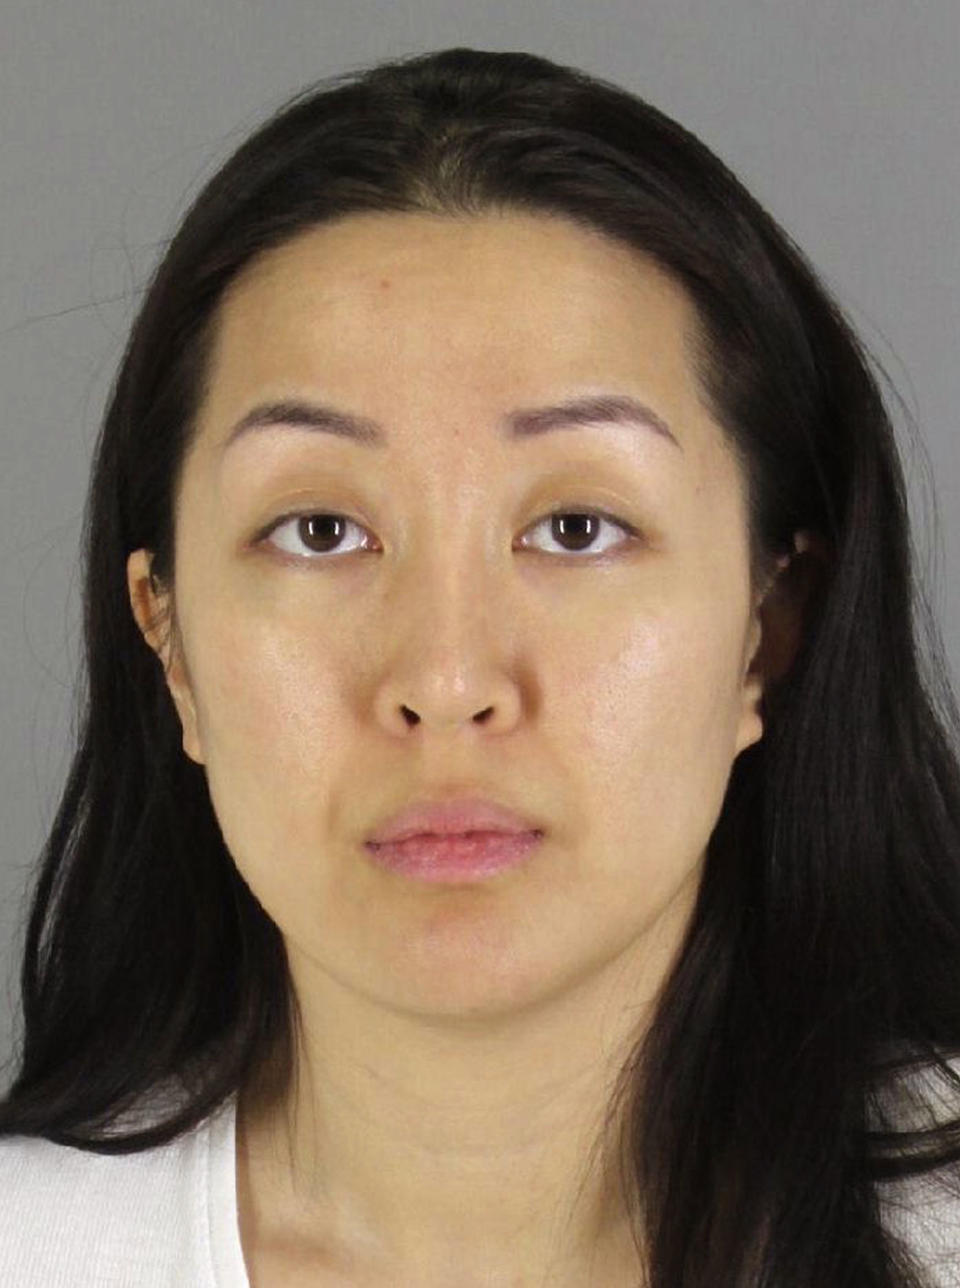 FILE - This undated booking photo provided by the San Mateo County, Calif., Sheriff's Office shows Tiffany Li. The trial of Li, a Chinese real estate scion who posted a $35 million bail after being charged with orchestrating the 2016 murder of her children's father, is set to start Thursday, Sept. 12, 2019, in Northern California. Tiffany Li's wealthy family, who made millions operating Chinese construction projects, helped her post the unprecedented bail, allowing her to remain under house arrest at her mansion. (San Mateo County Sheriff's Office via AP, File)